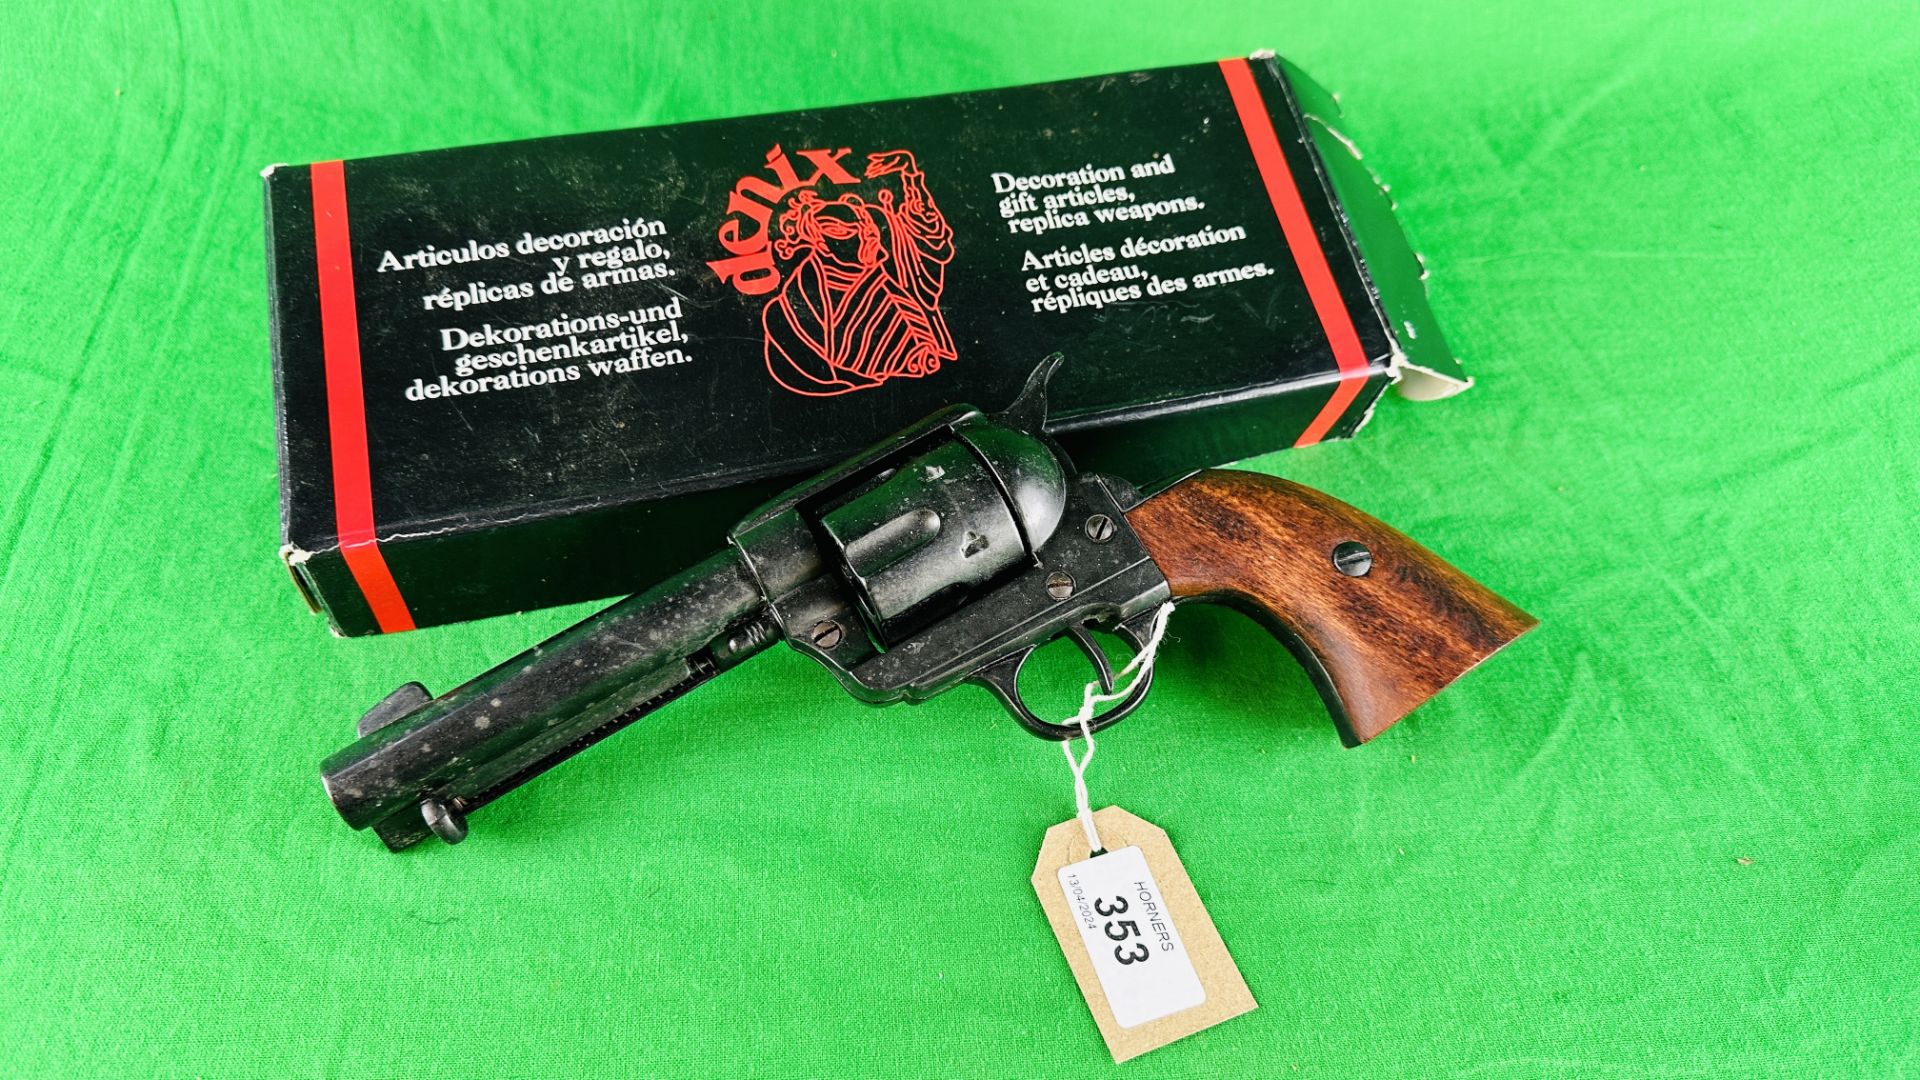 A REPLICA 6 SHOT REVOLVER IN DENIX BOX - (ALL GUNS TO BE INSPECTED AND SERVICED BY QUALIFIED